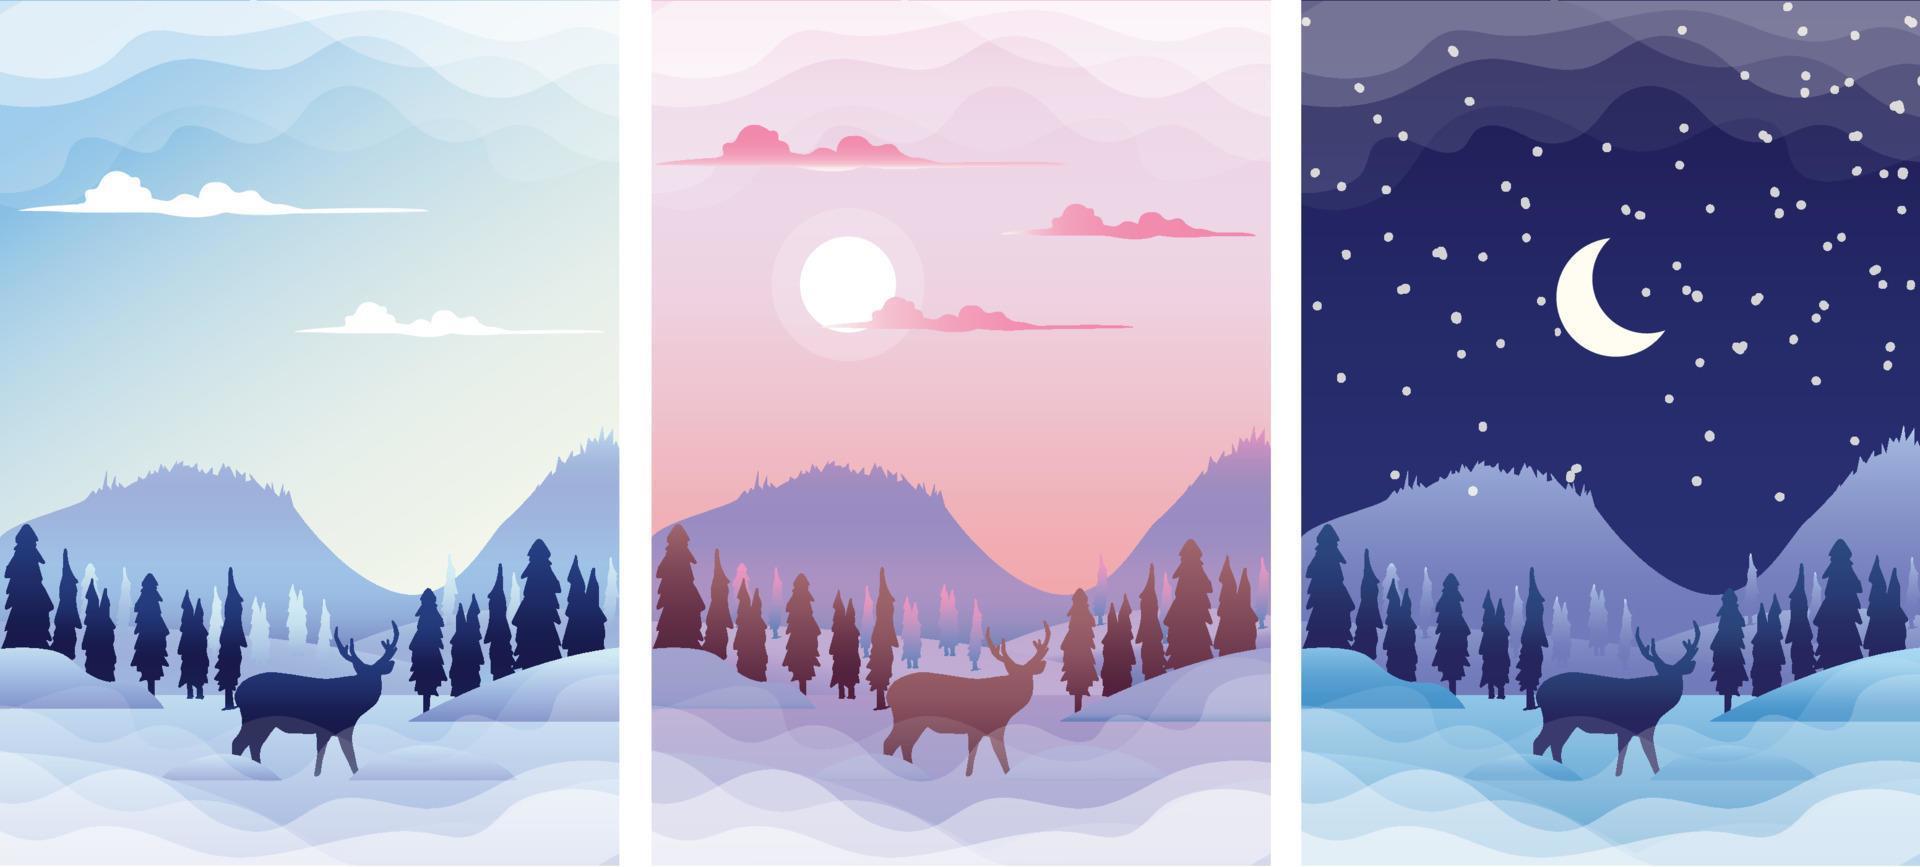 Winter Sale with Landscape at sunrise, sunset and night. Winter Season banners set template vector illustration.